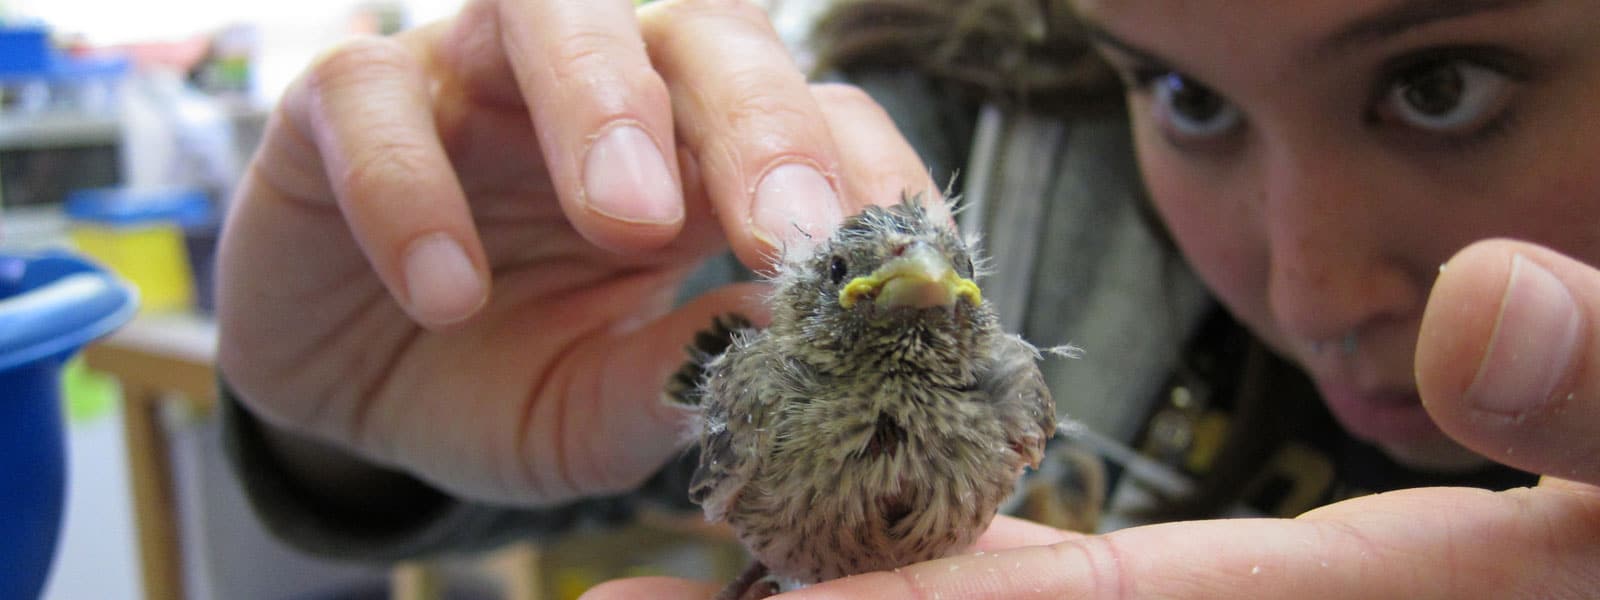 Examining a songbird at WildCare. Photo by Alison Hermance